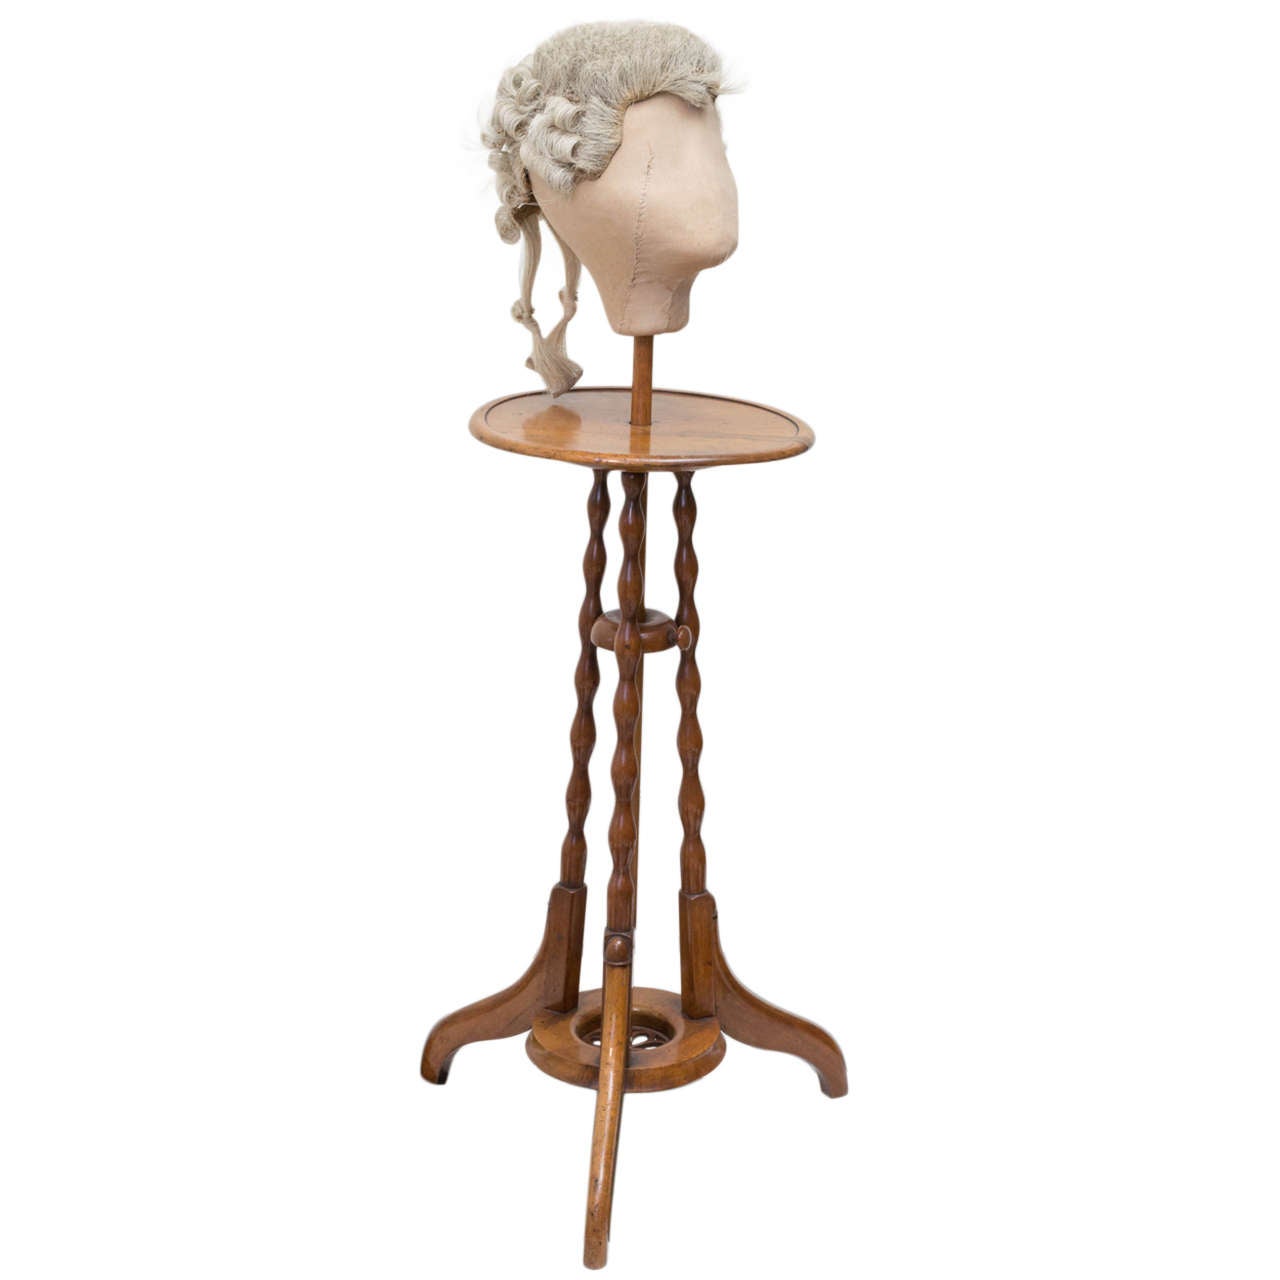 19th c. English William IV Wig  Stand With Wig For Sale